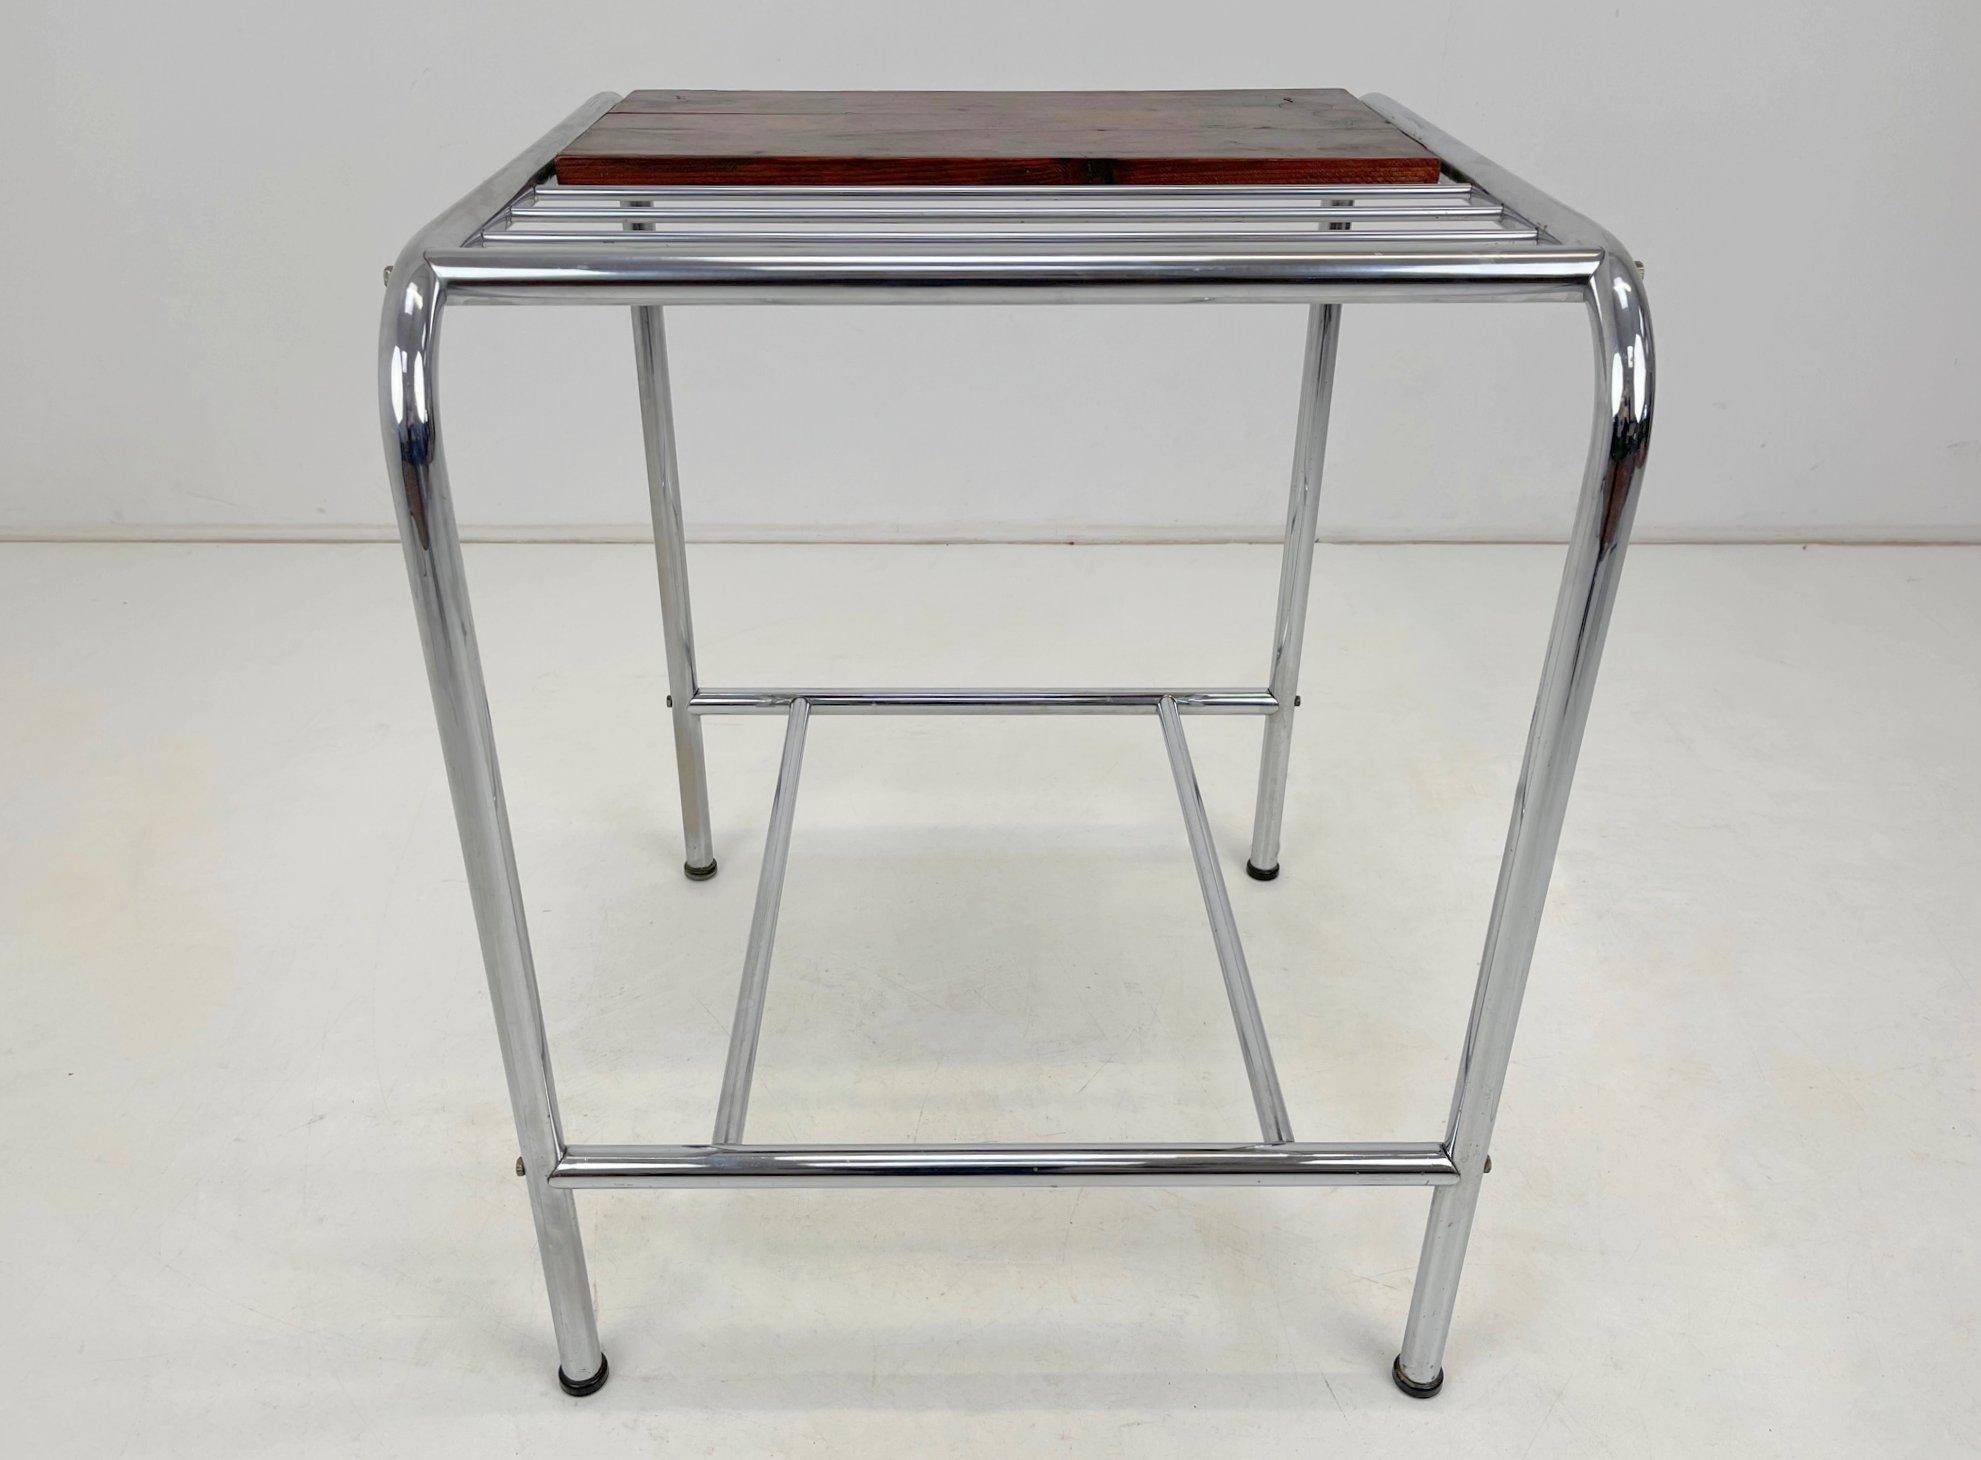 Functionalist or Bauhaus chrome side table with wooden shelf. 
Good original condition.